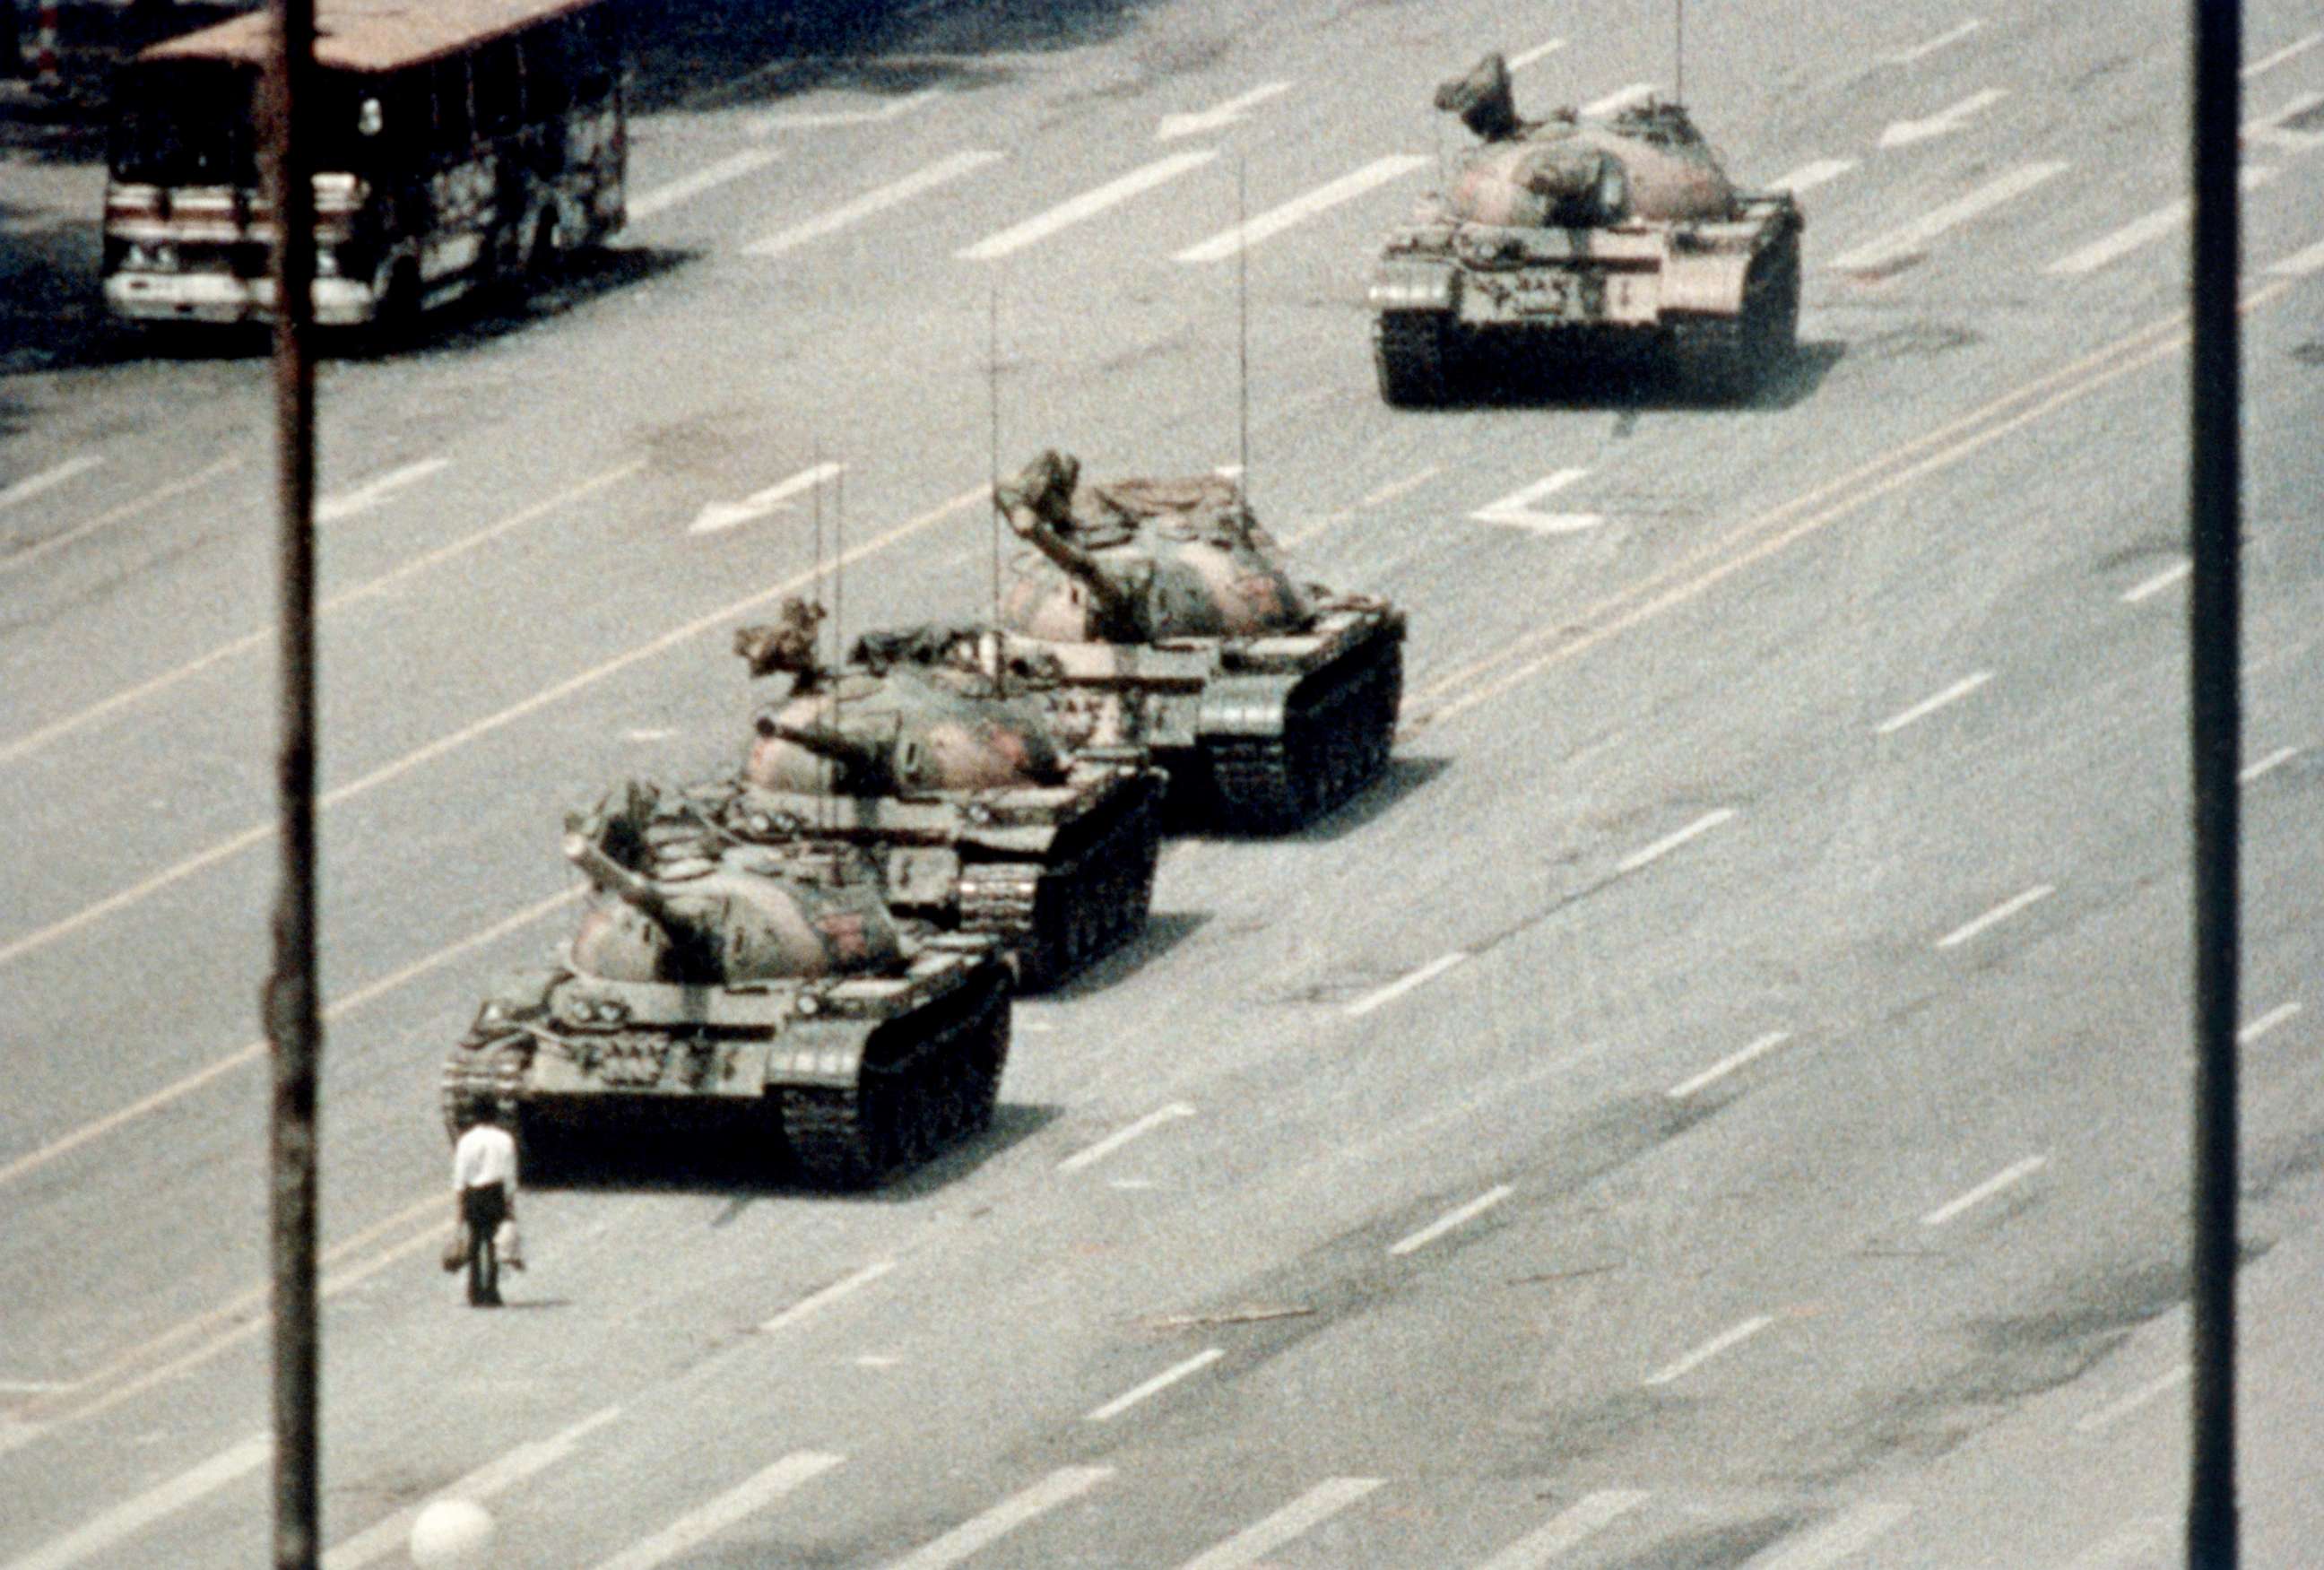 PHOTO: A demonstrator blocks the path of a tank convoy along the Avenue of Eternal Peace near Tiananmen Square in Beijing, June 05, 1989.